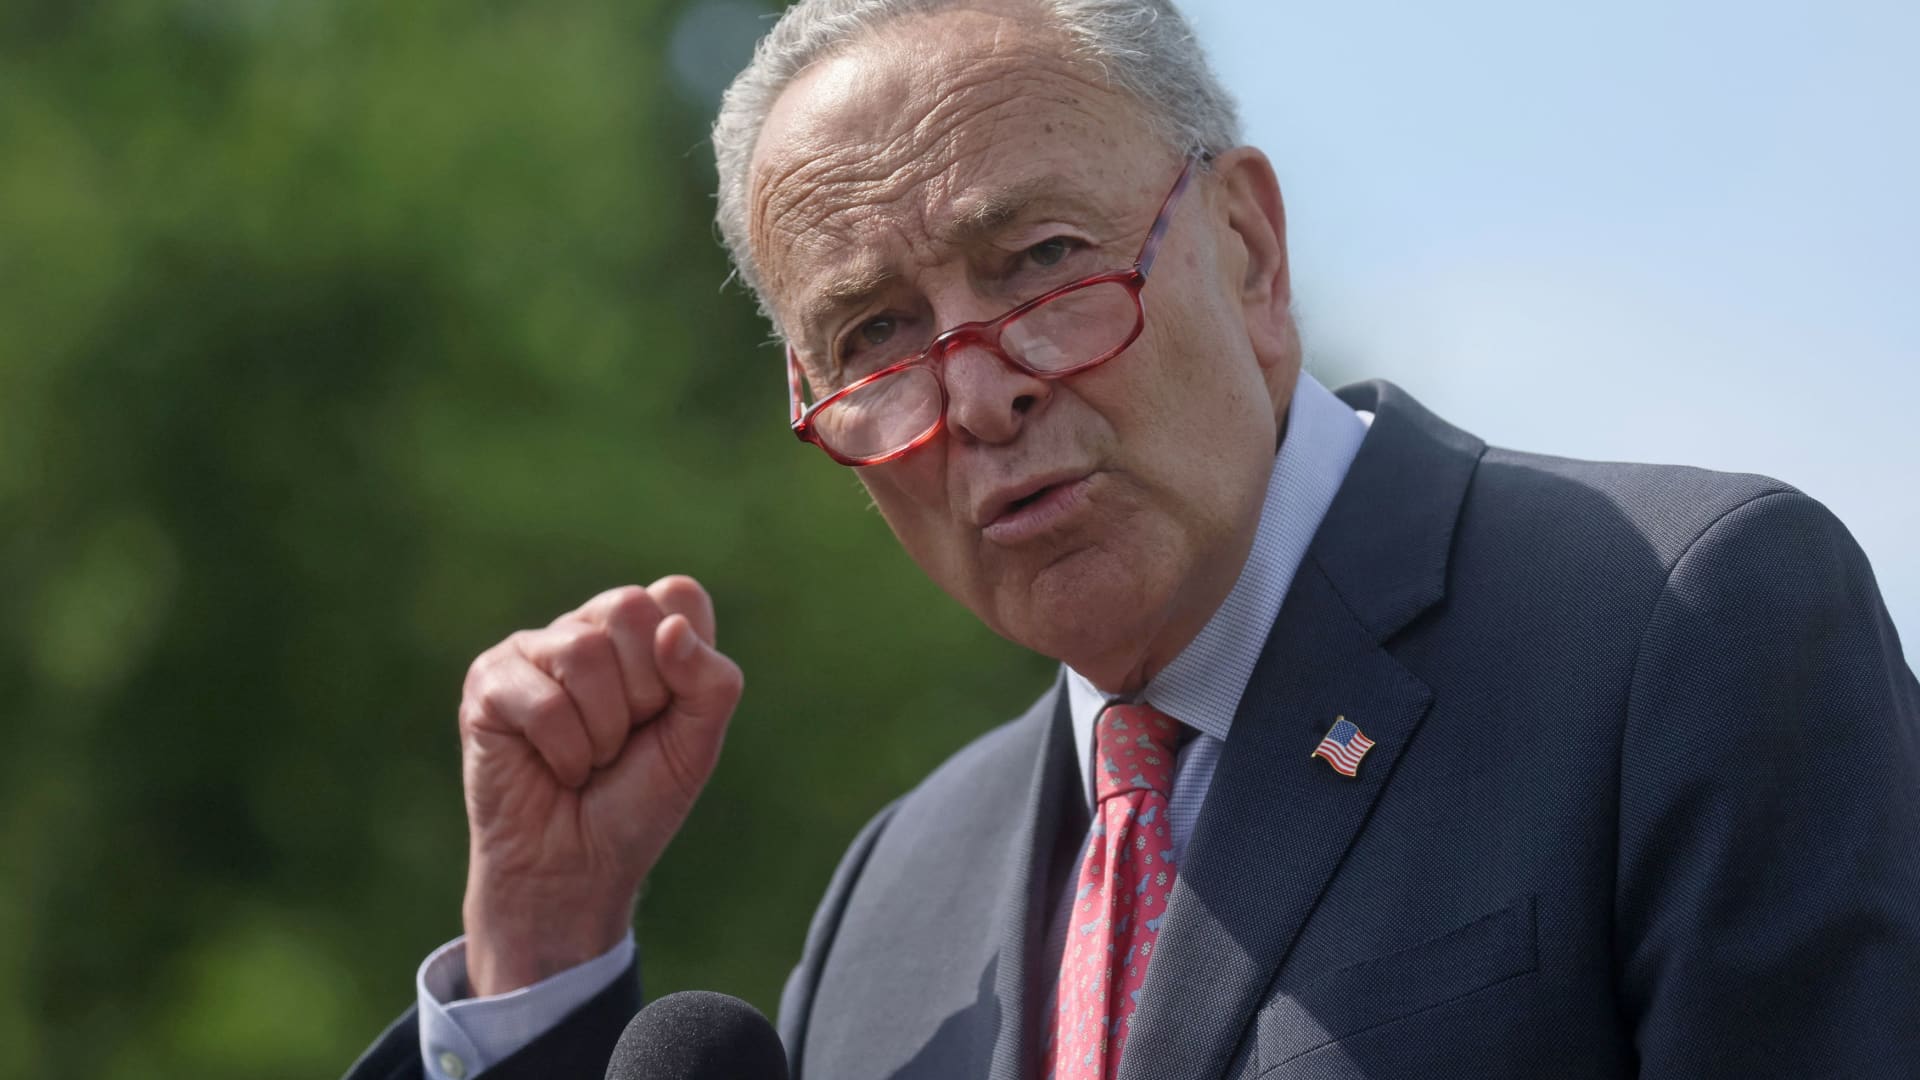 Student loan forgiveness 'is not a problem that concerns the wealthy,' Schumer says